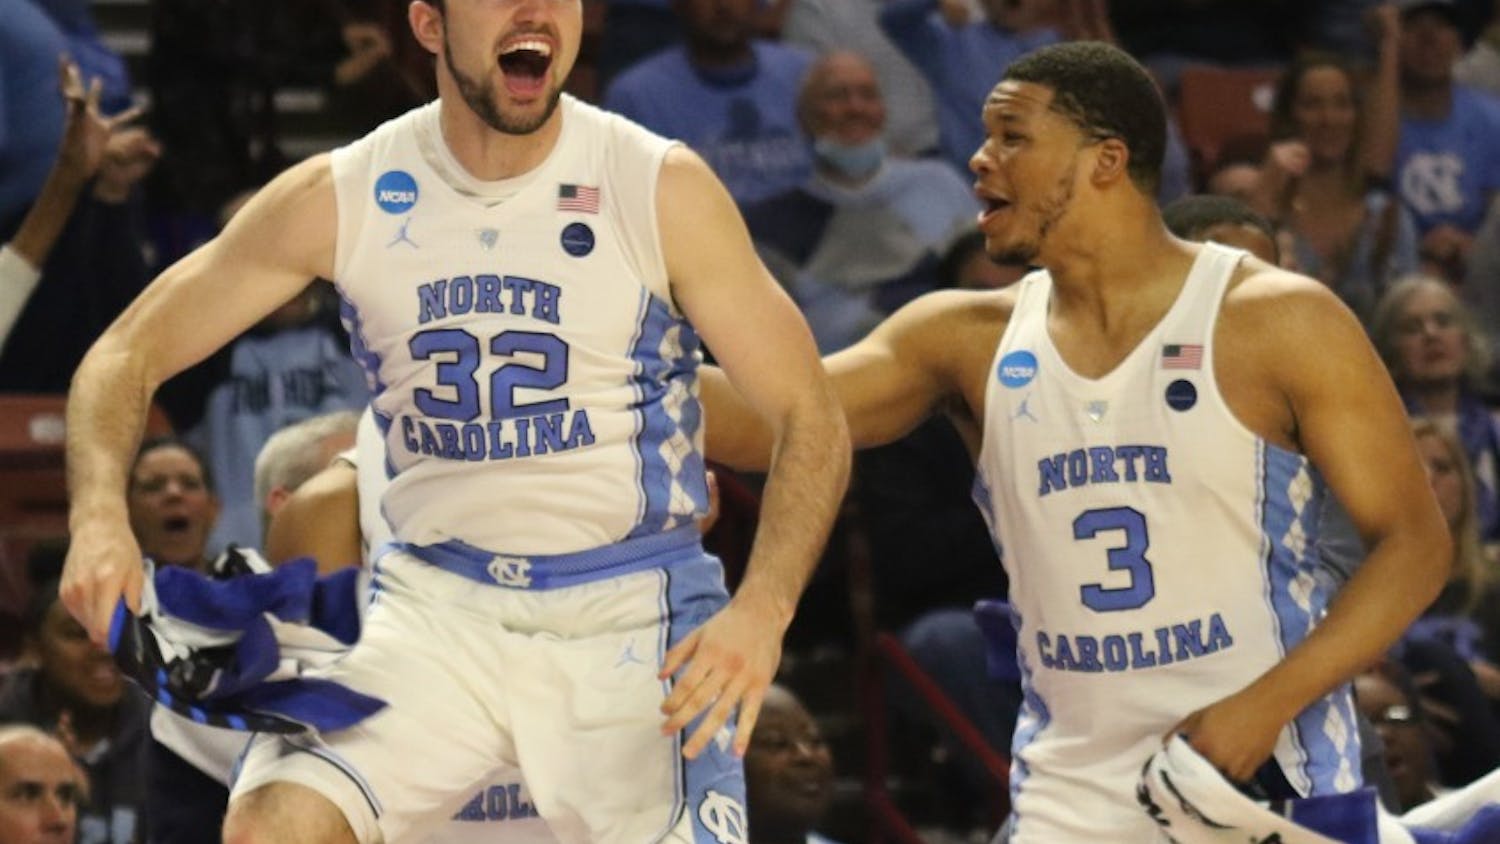 North Carolina forward Luke Maye (32) celebrates in the closing moments of the team's 39-point victory over Texas Southern in the first round of the NCAA Tournament in Greenville on Friday.